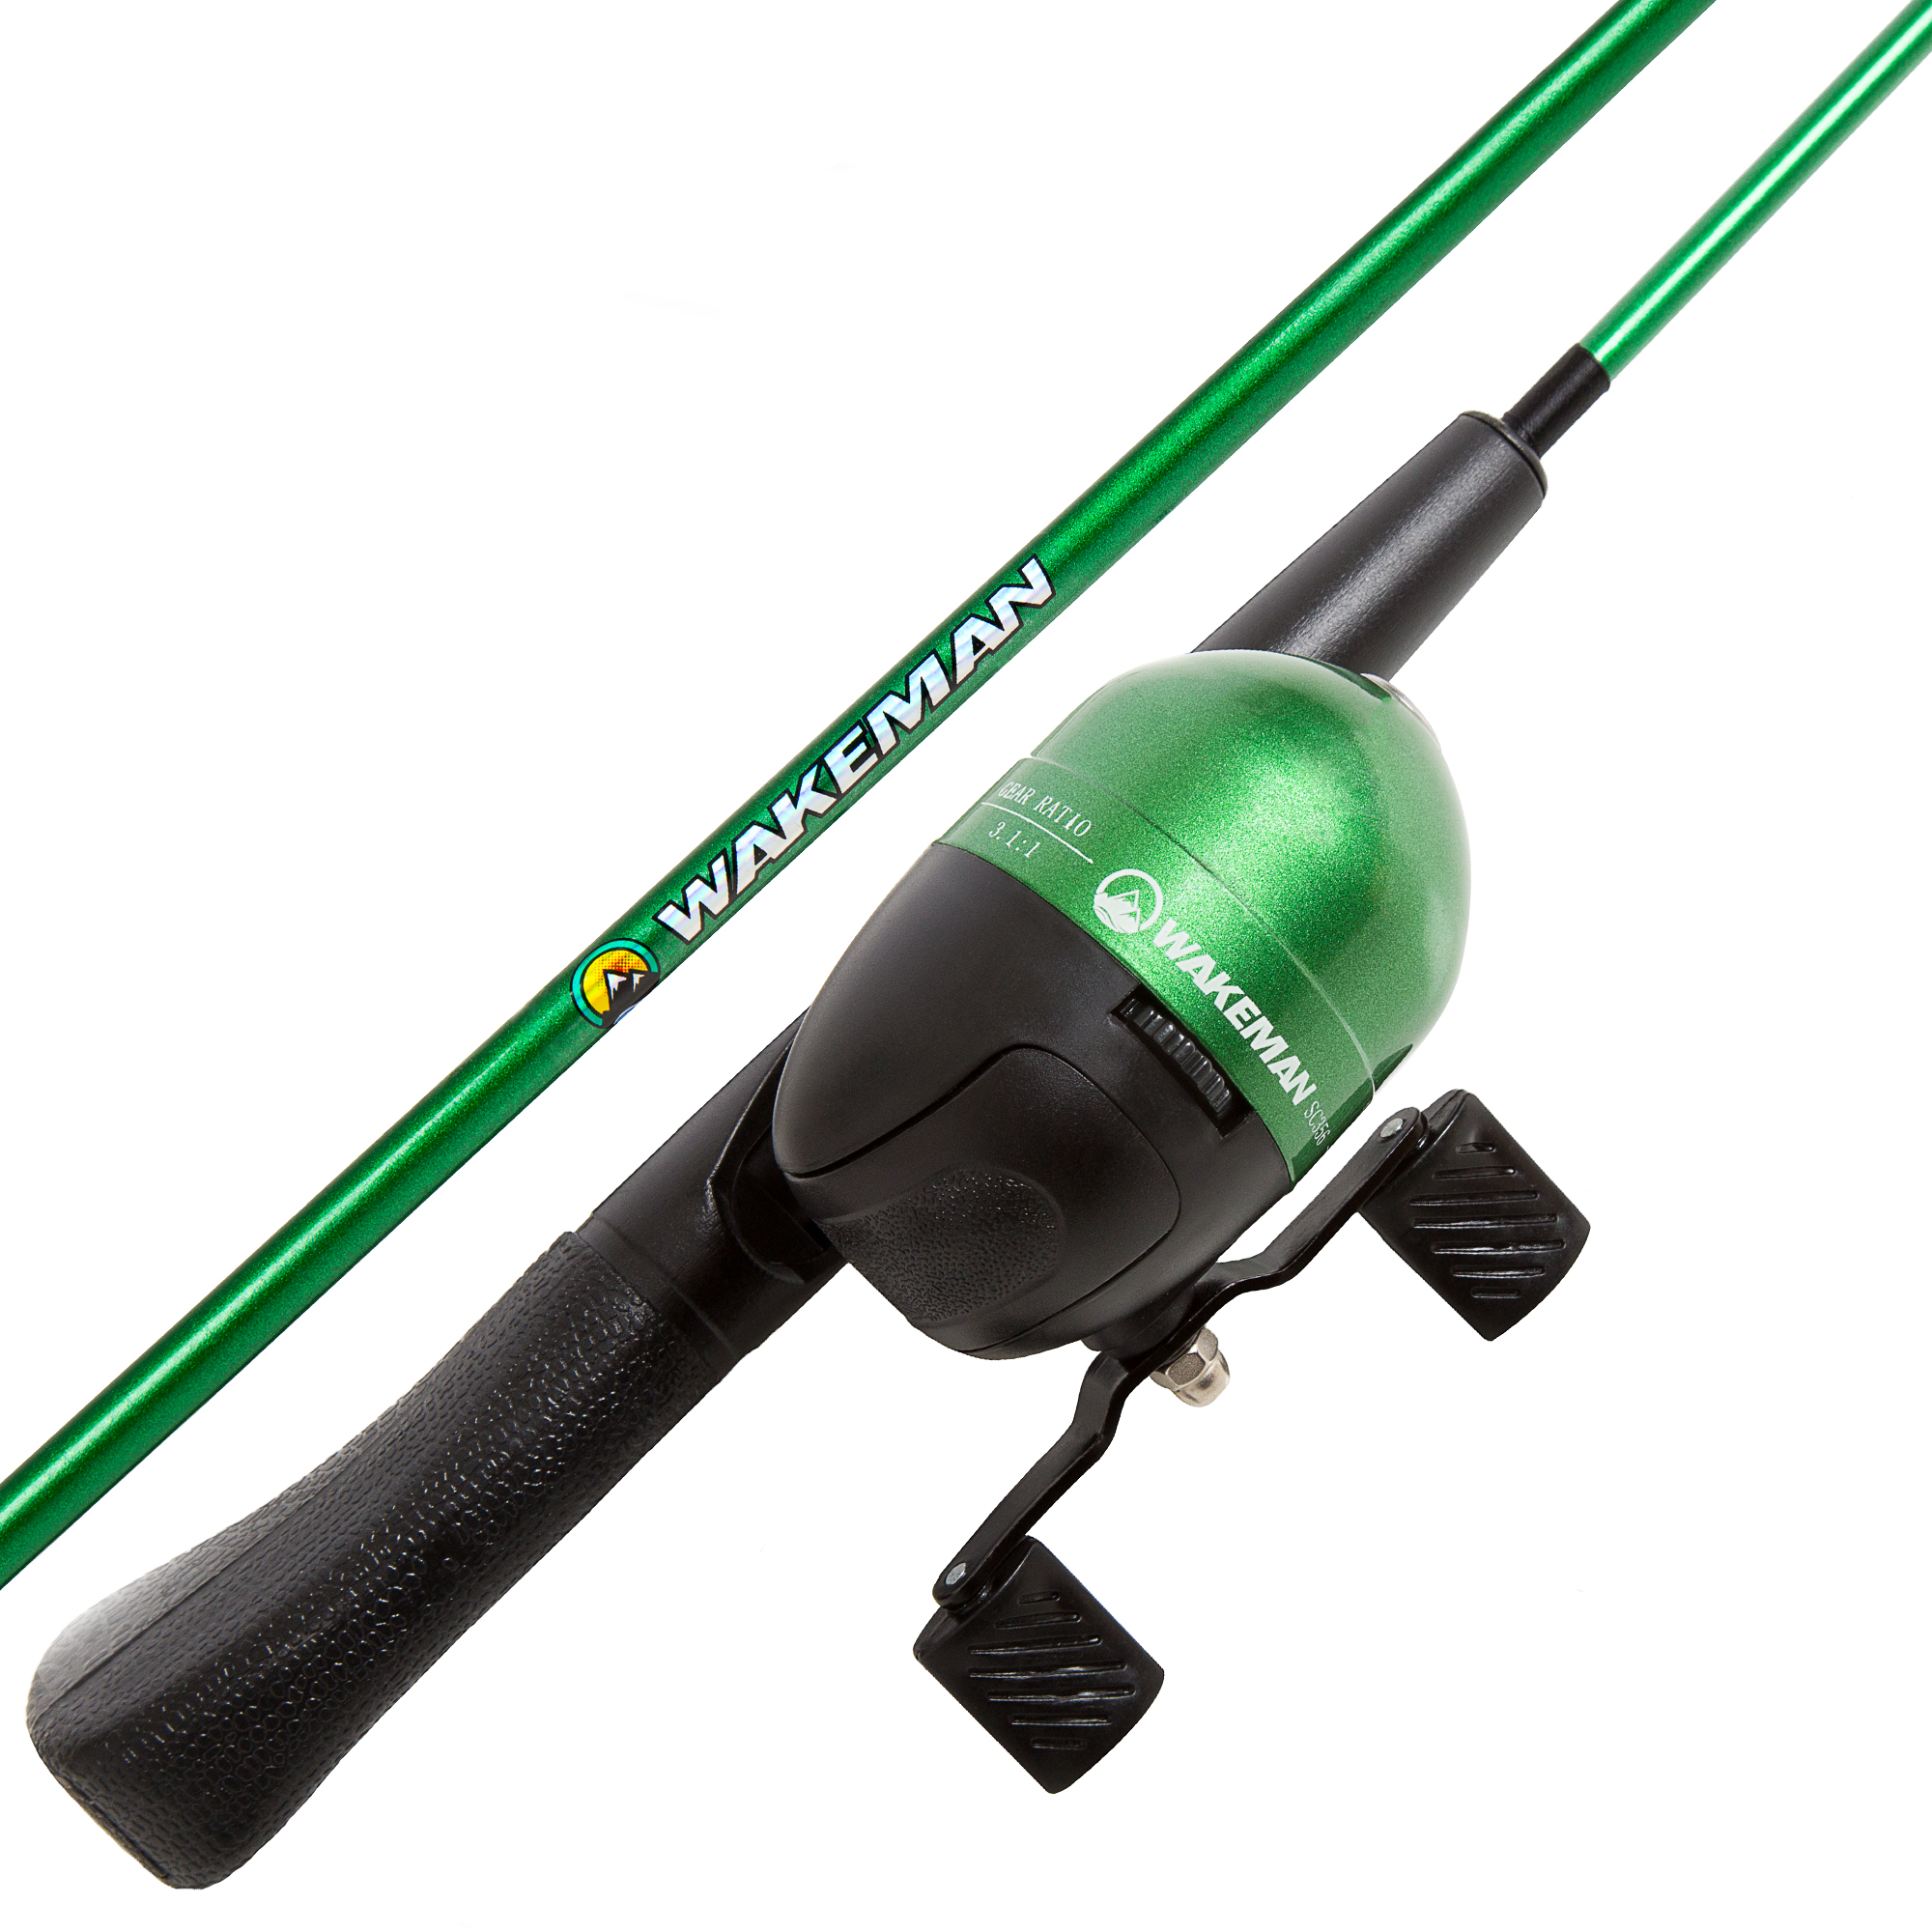 Wakeman Spawn Series Kids Spin Cast Combo Fishing Pole and Tackle Set - image 1 of 5